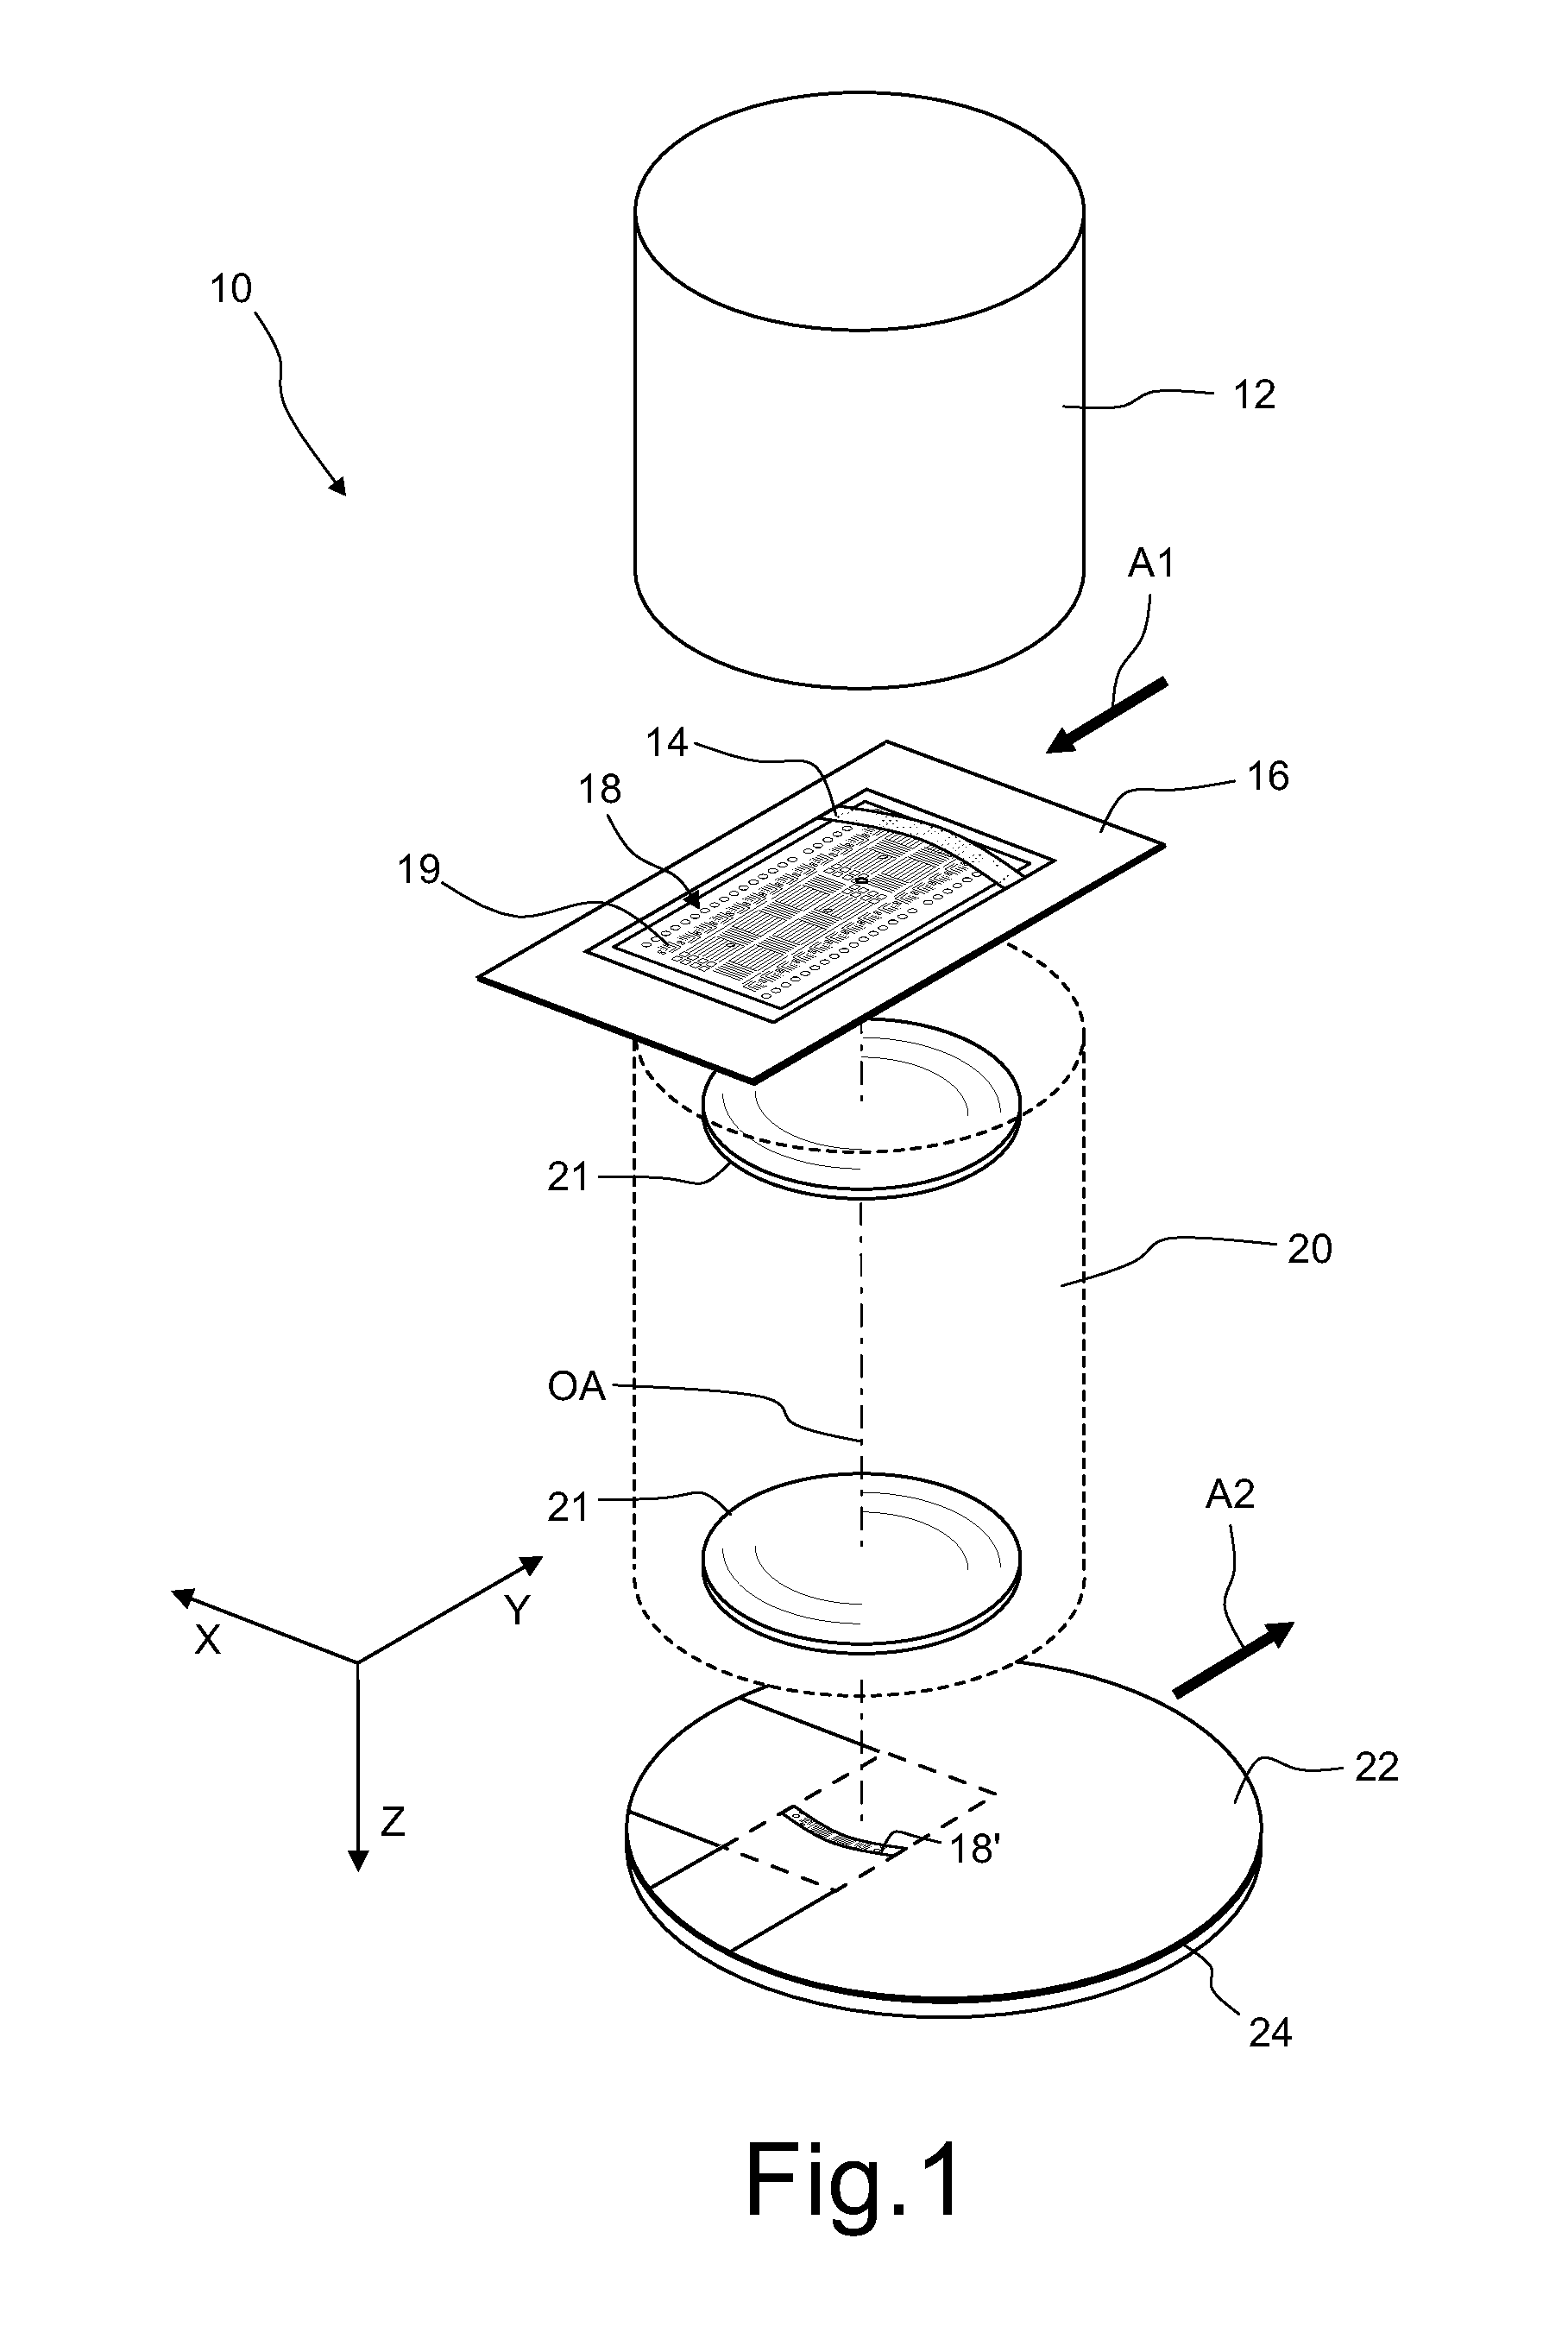 Illumination system of a microlithographic projection exposure apparatus